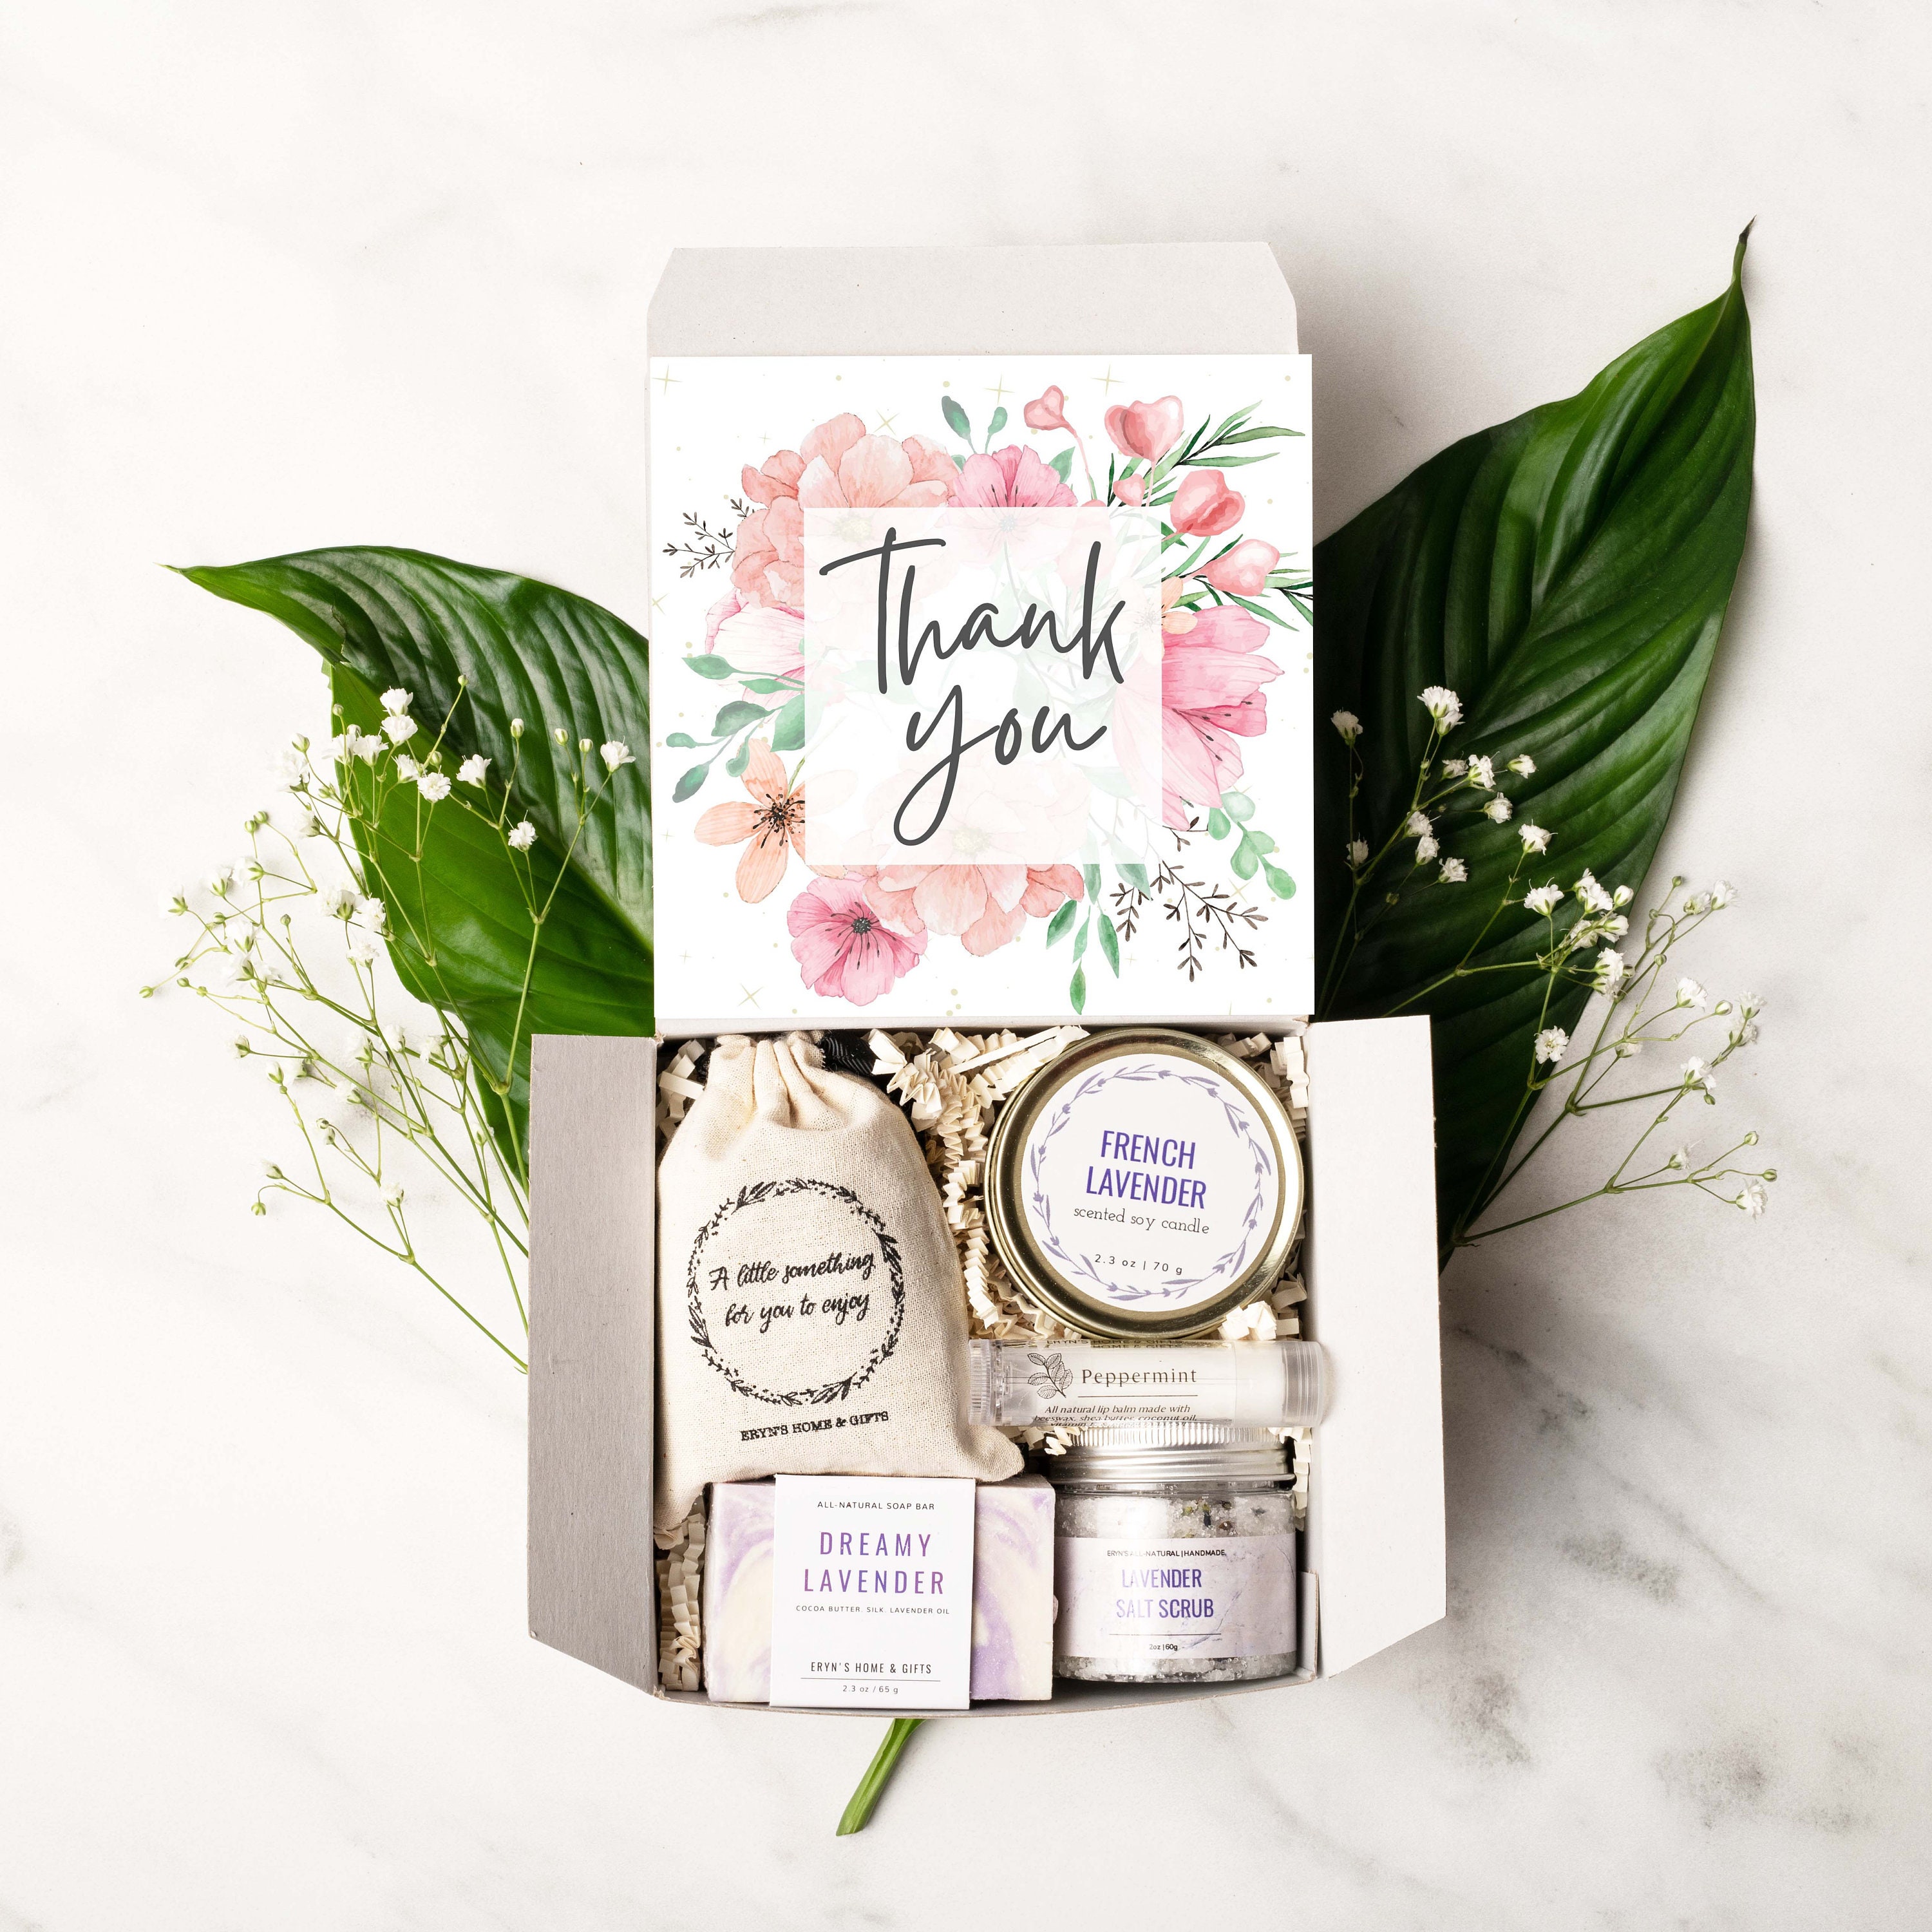 The Best Gifts for Hosts to Say 'Thank You